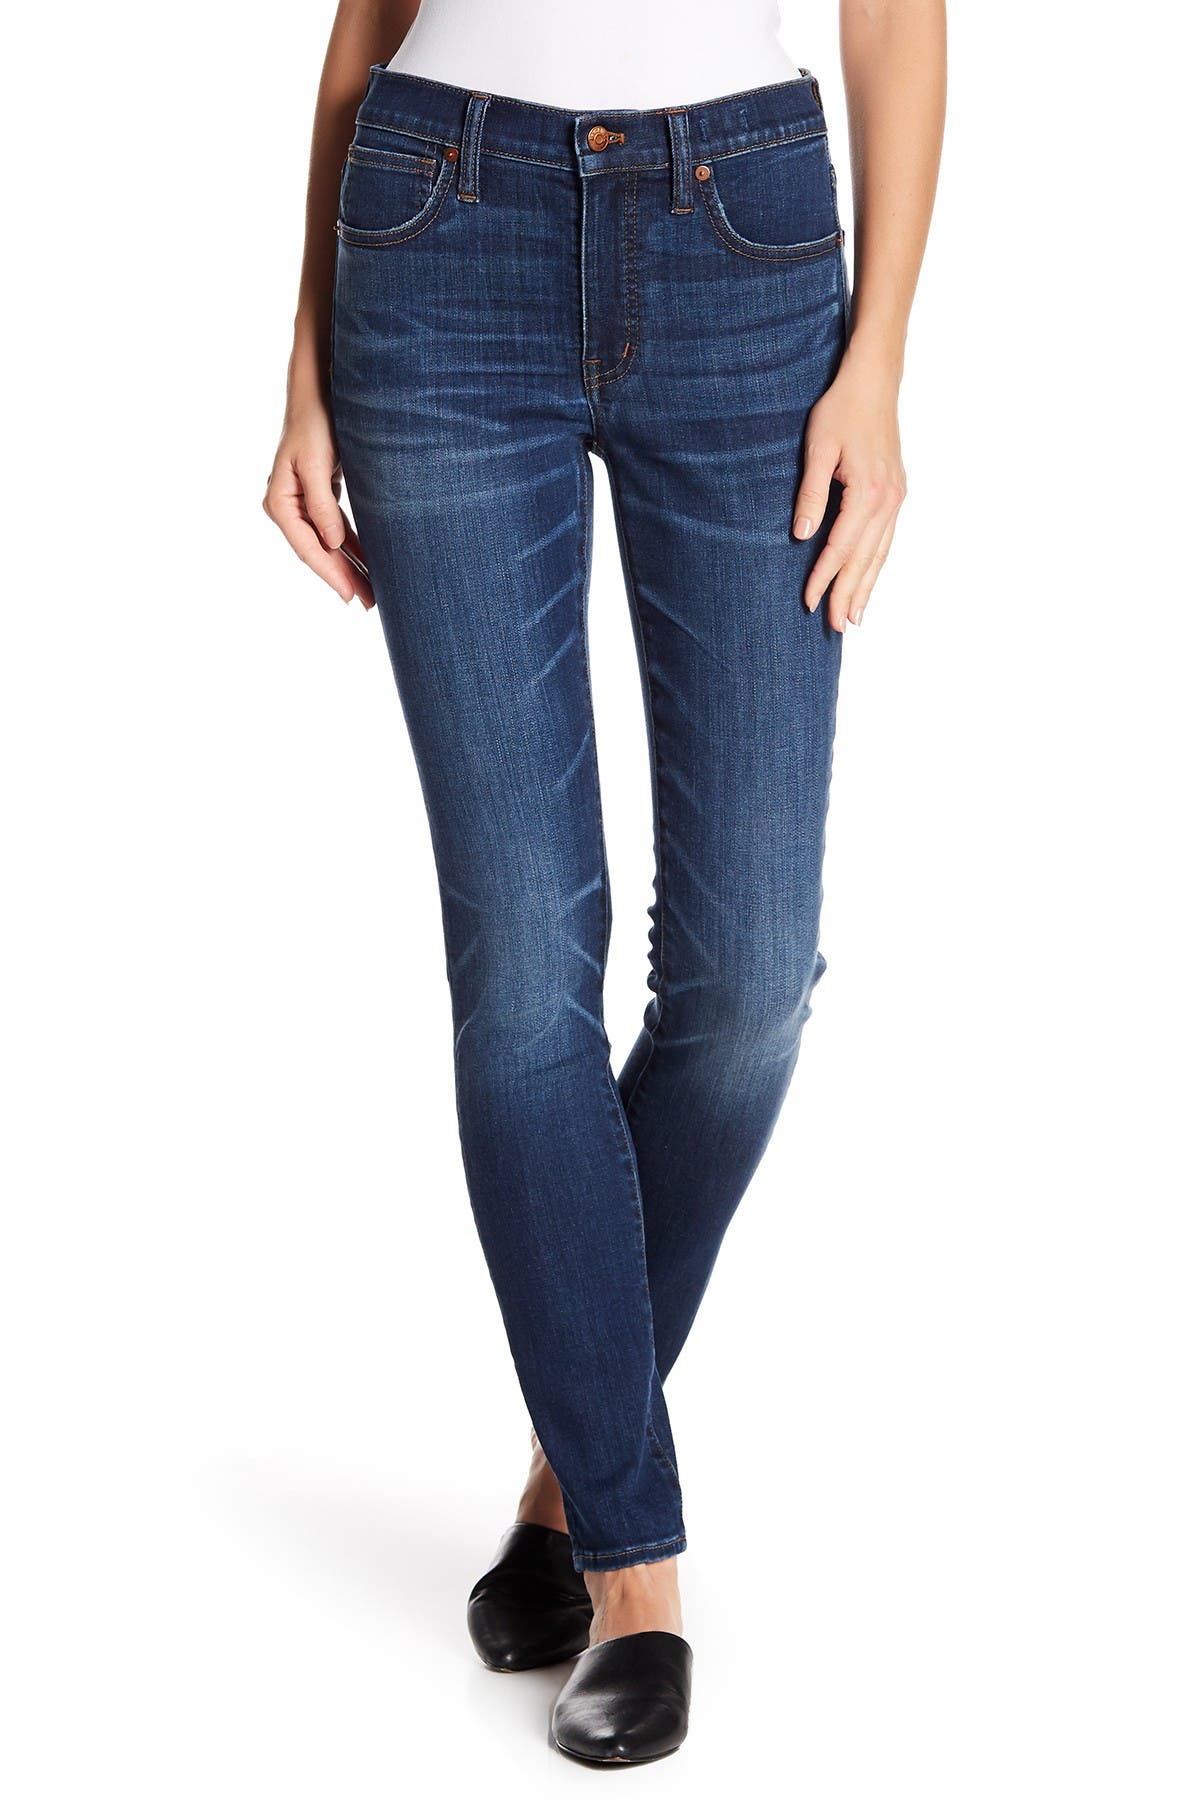 old navy 10 jeans